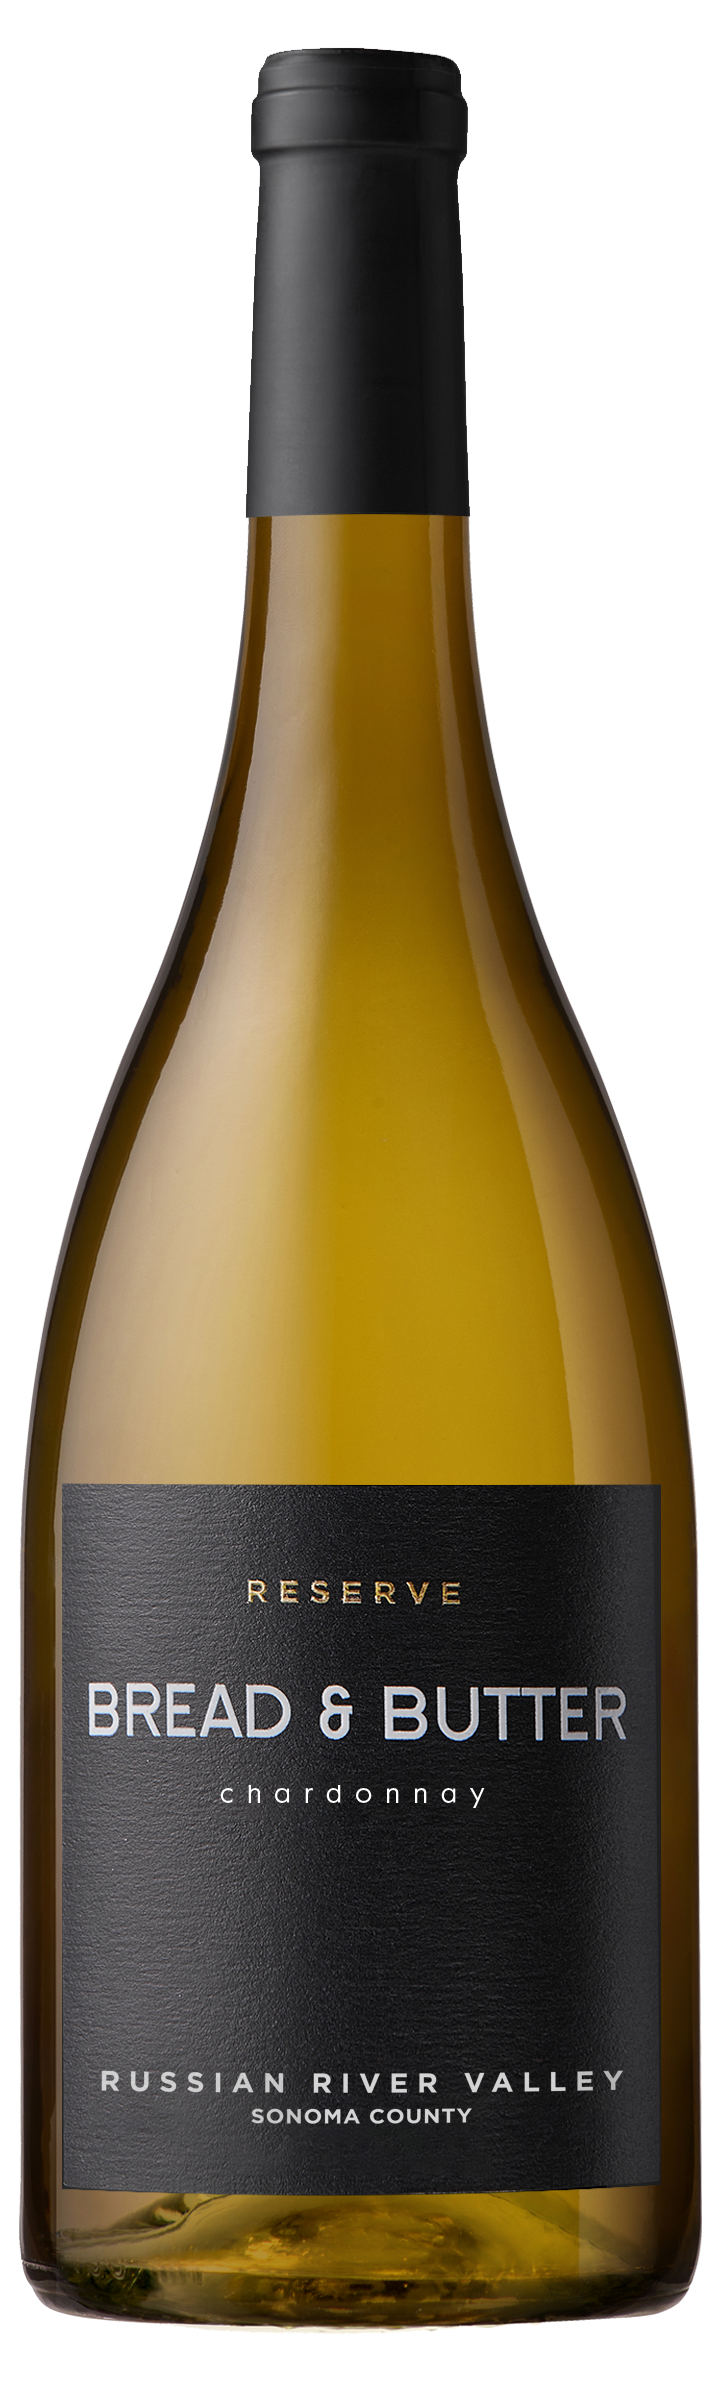 Bread & Butter Reserve Russian River Valley Chardonnay